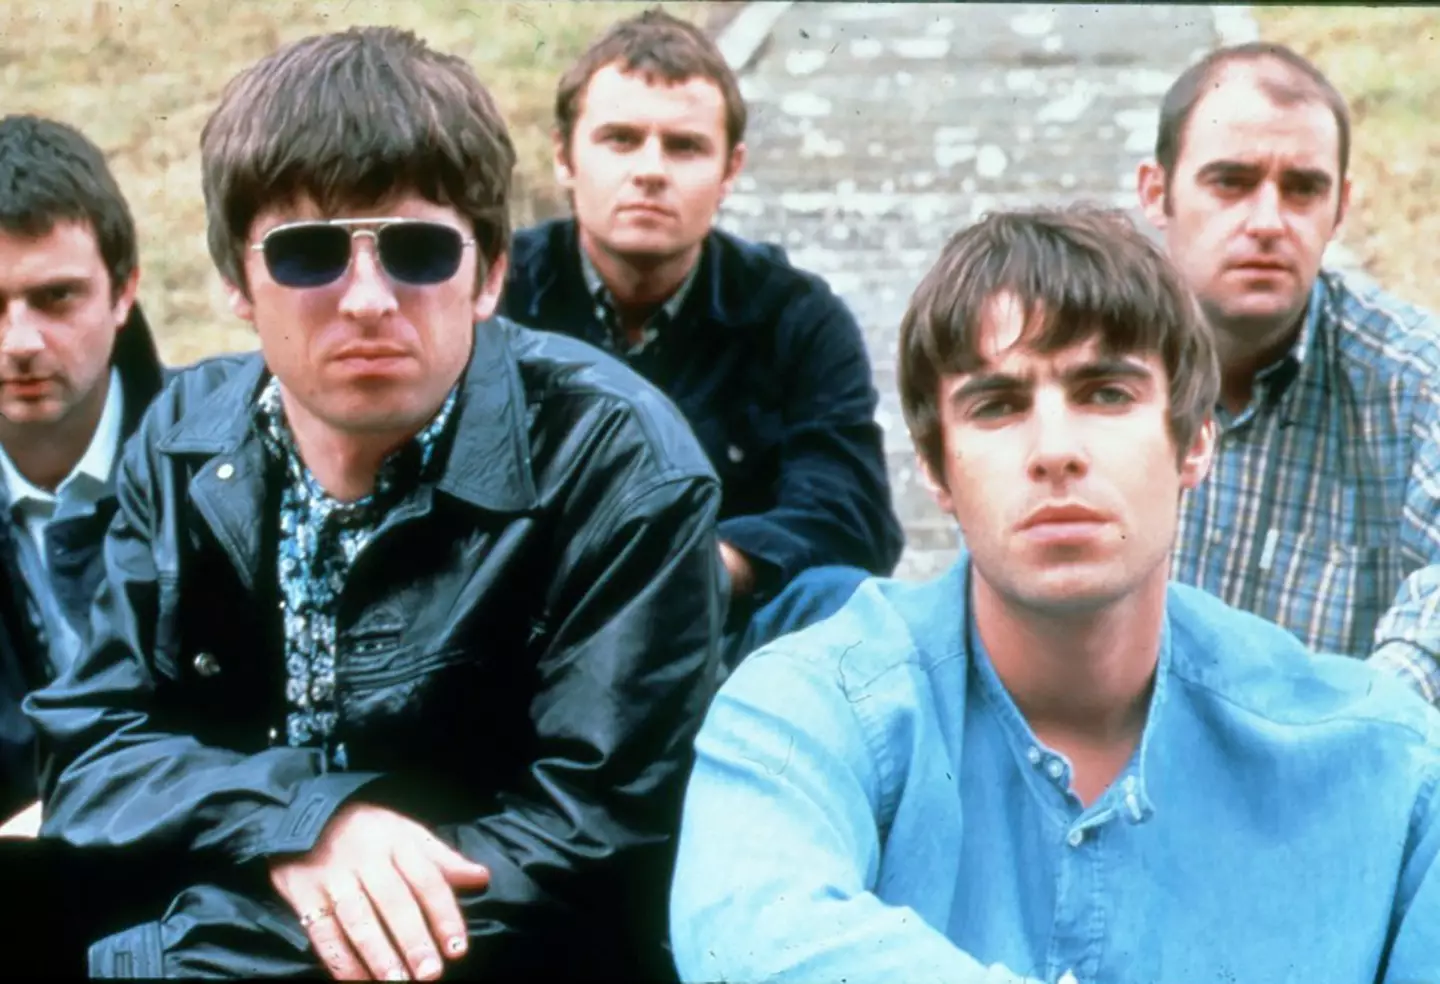 An Oasis reunion would be huge.